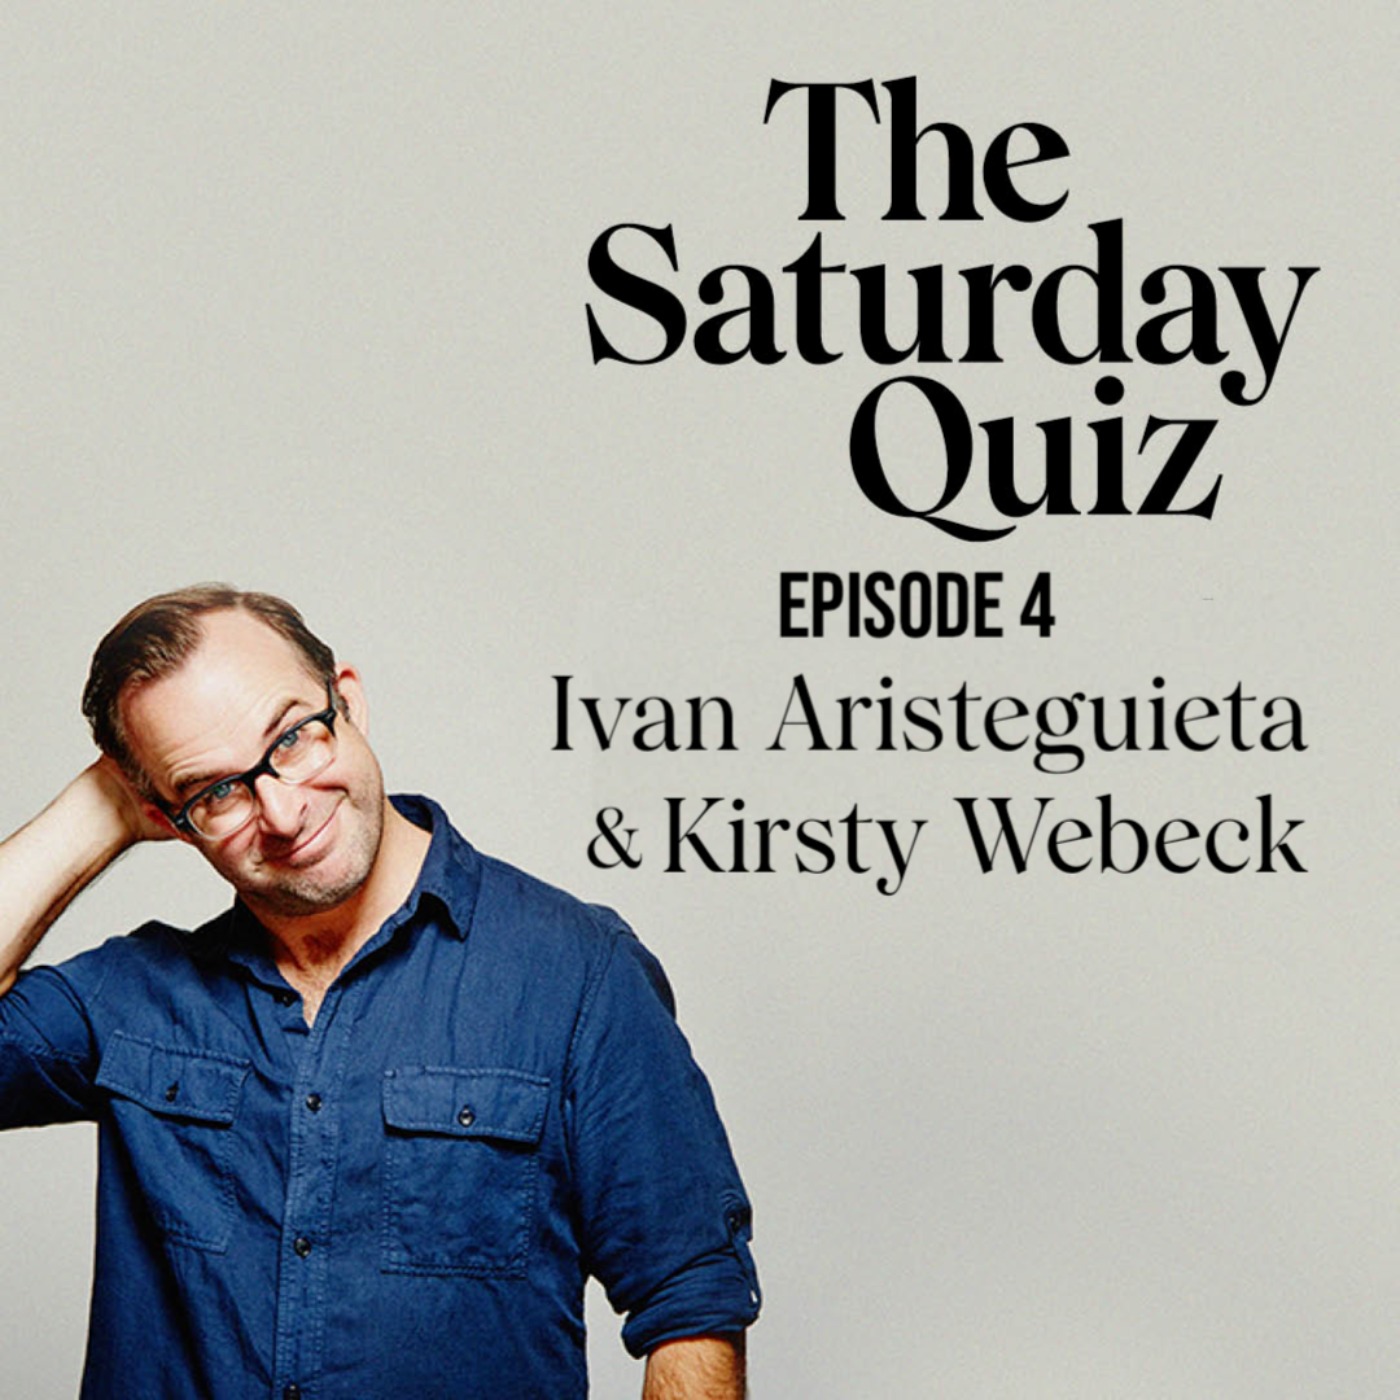 Last Names with Ivan Aristeguieta and Kirsty Webeck